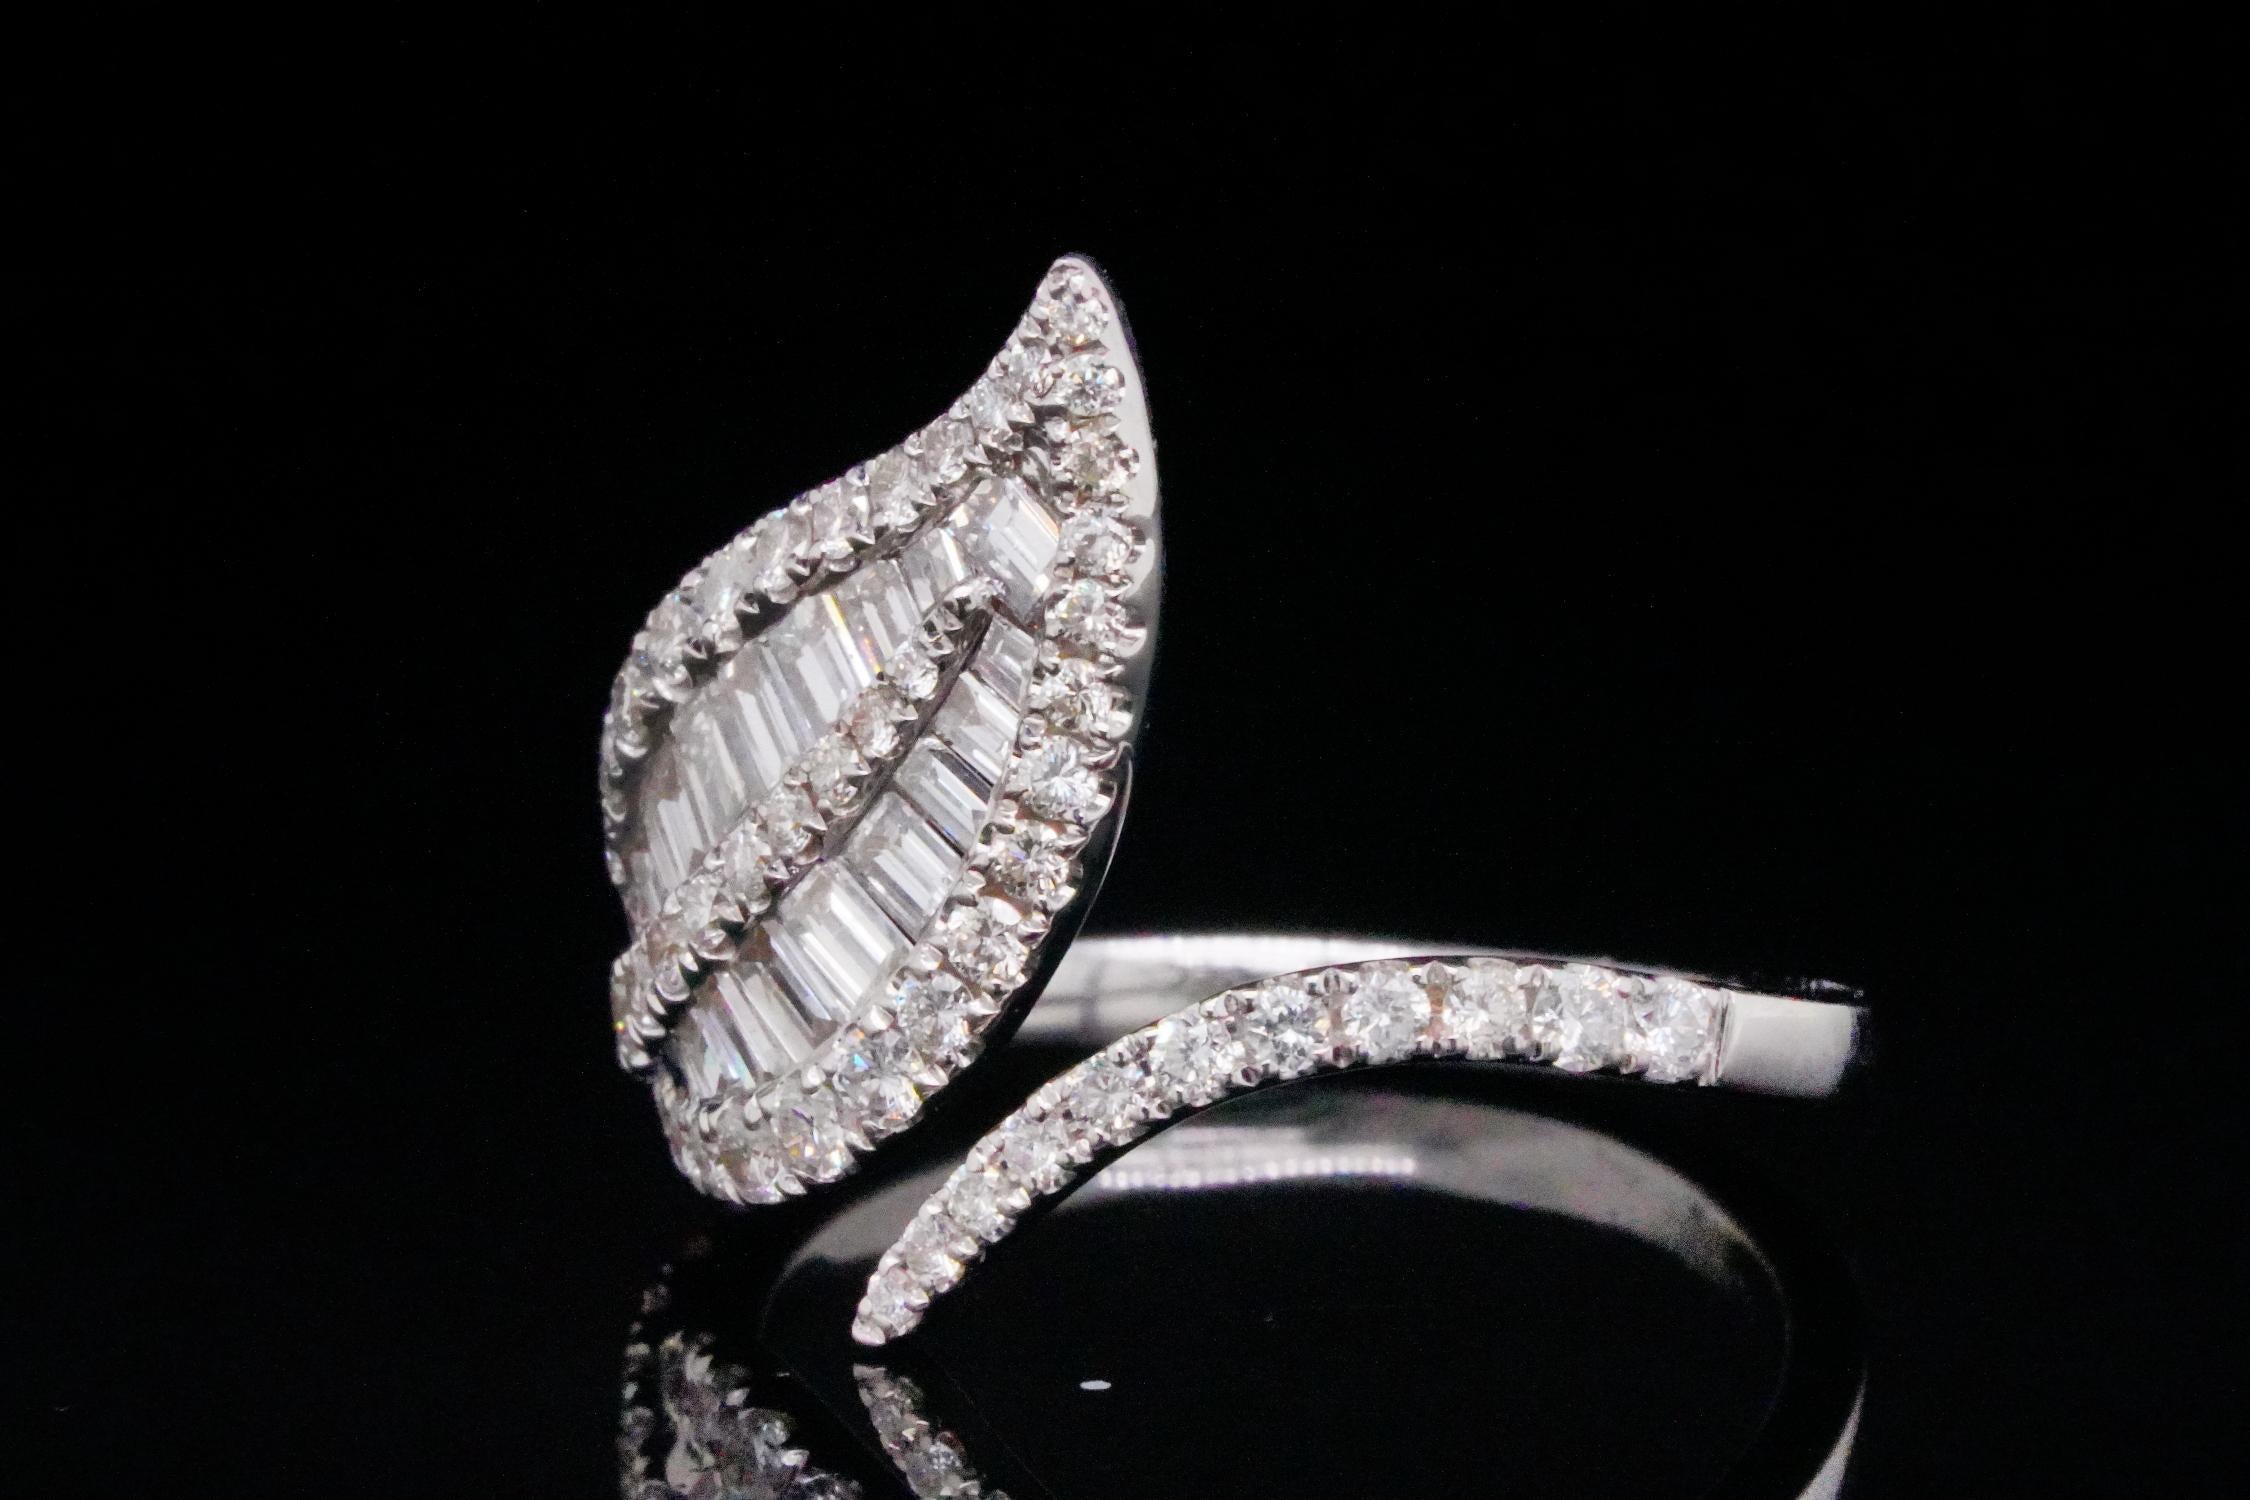 Very pretty and sparkling naturalistic leaf form ring. 1.10ctw VS1-VS2/G-H Diamond and 18K White Gold Leaf Ring - This lovely ring was finely crafted of solid 18k white gold and has an elegant design in the form of a leaf on a vine that wraps around